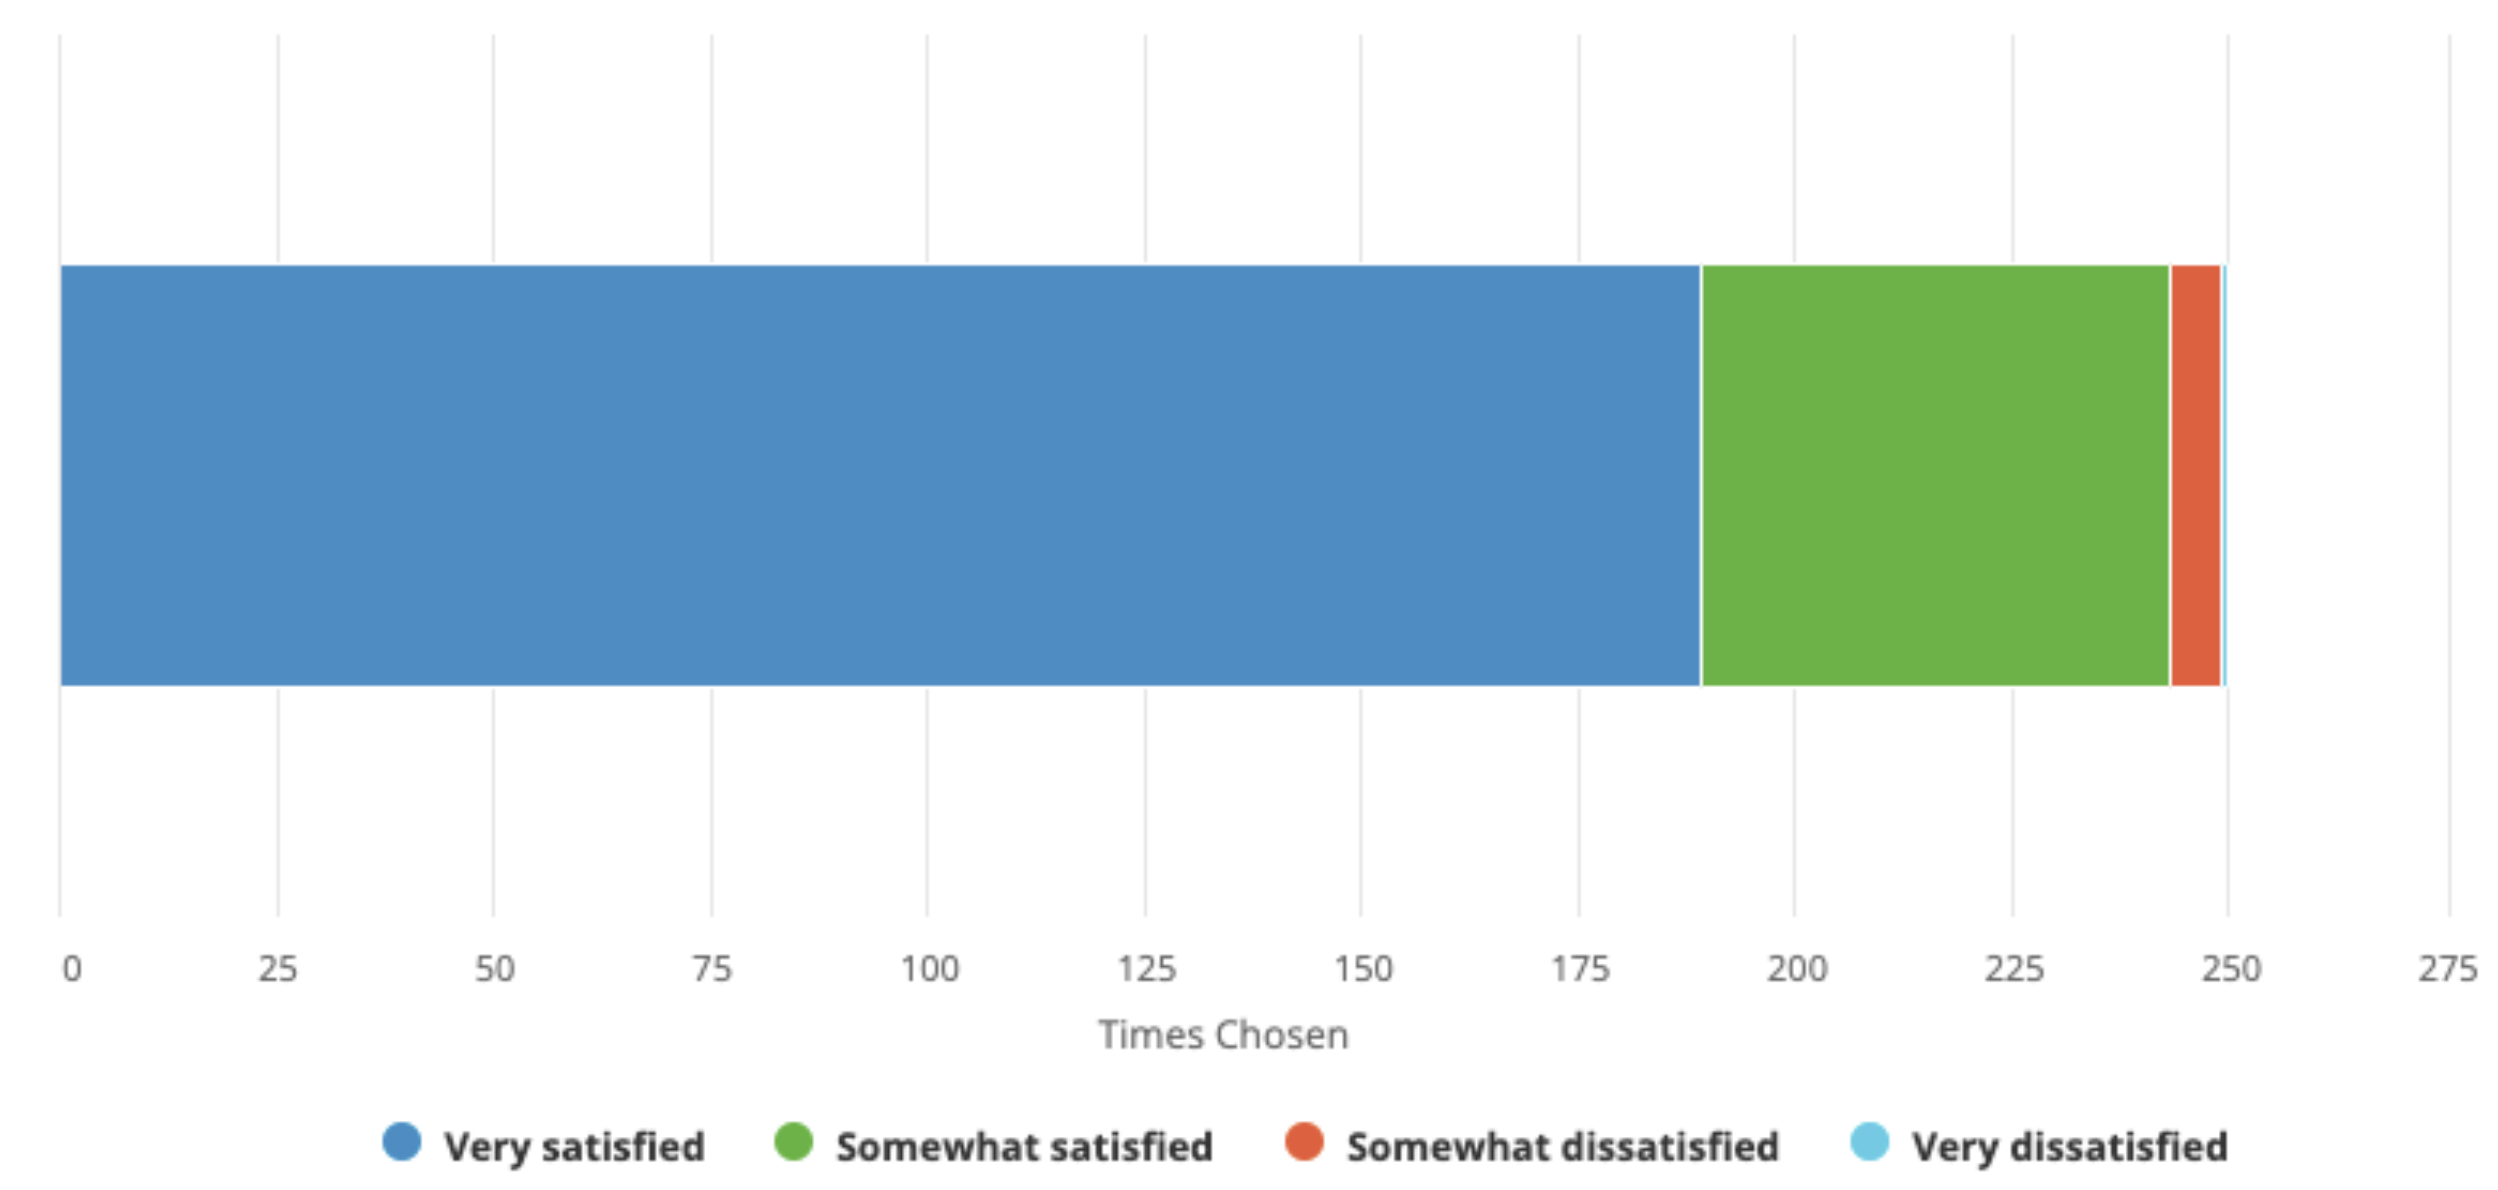 2021 User Survey - Overall Satisfaction